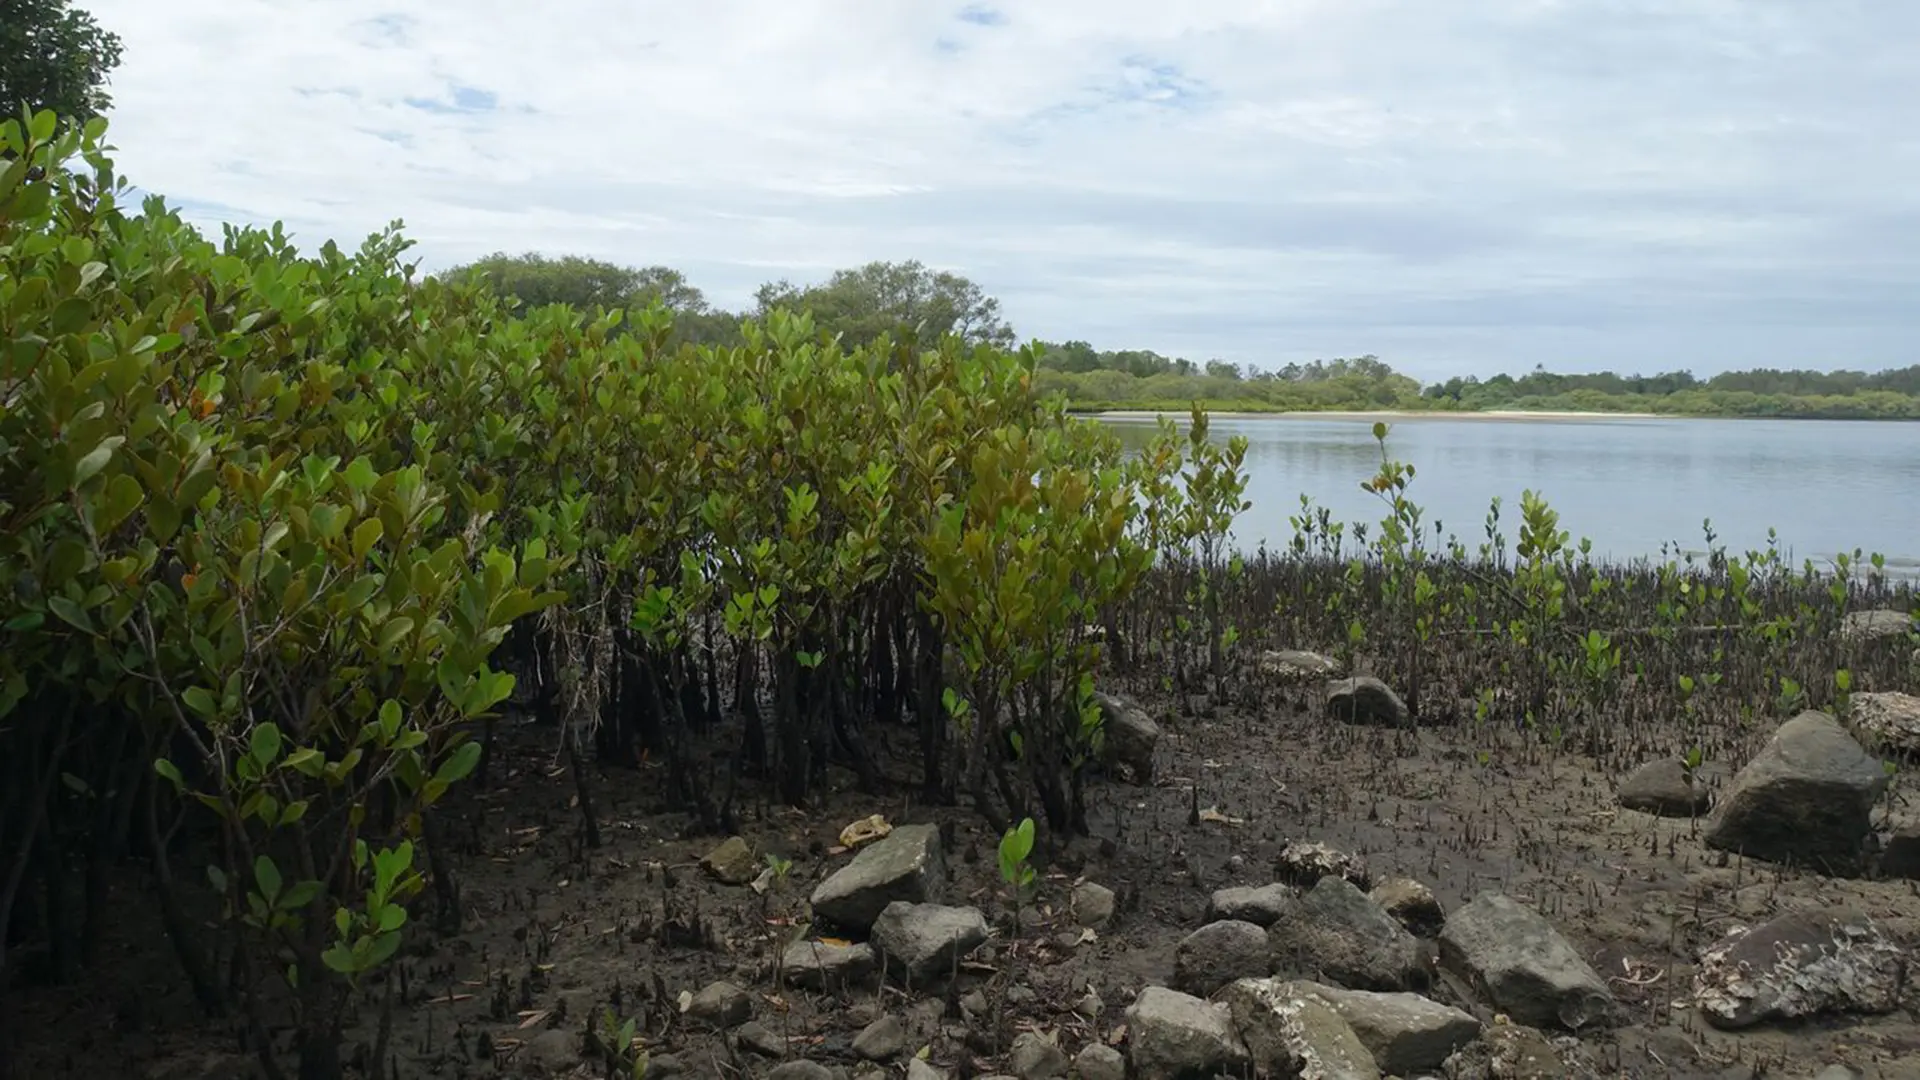 mangroves next to a muddy area and a river behind